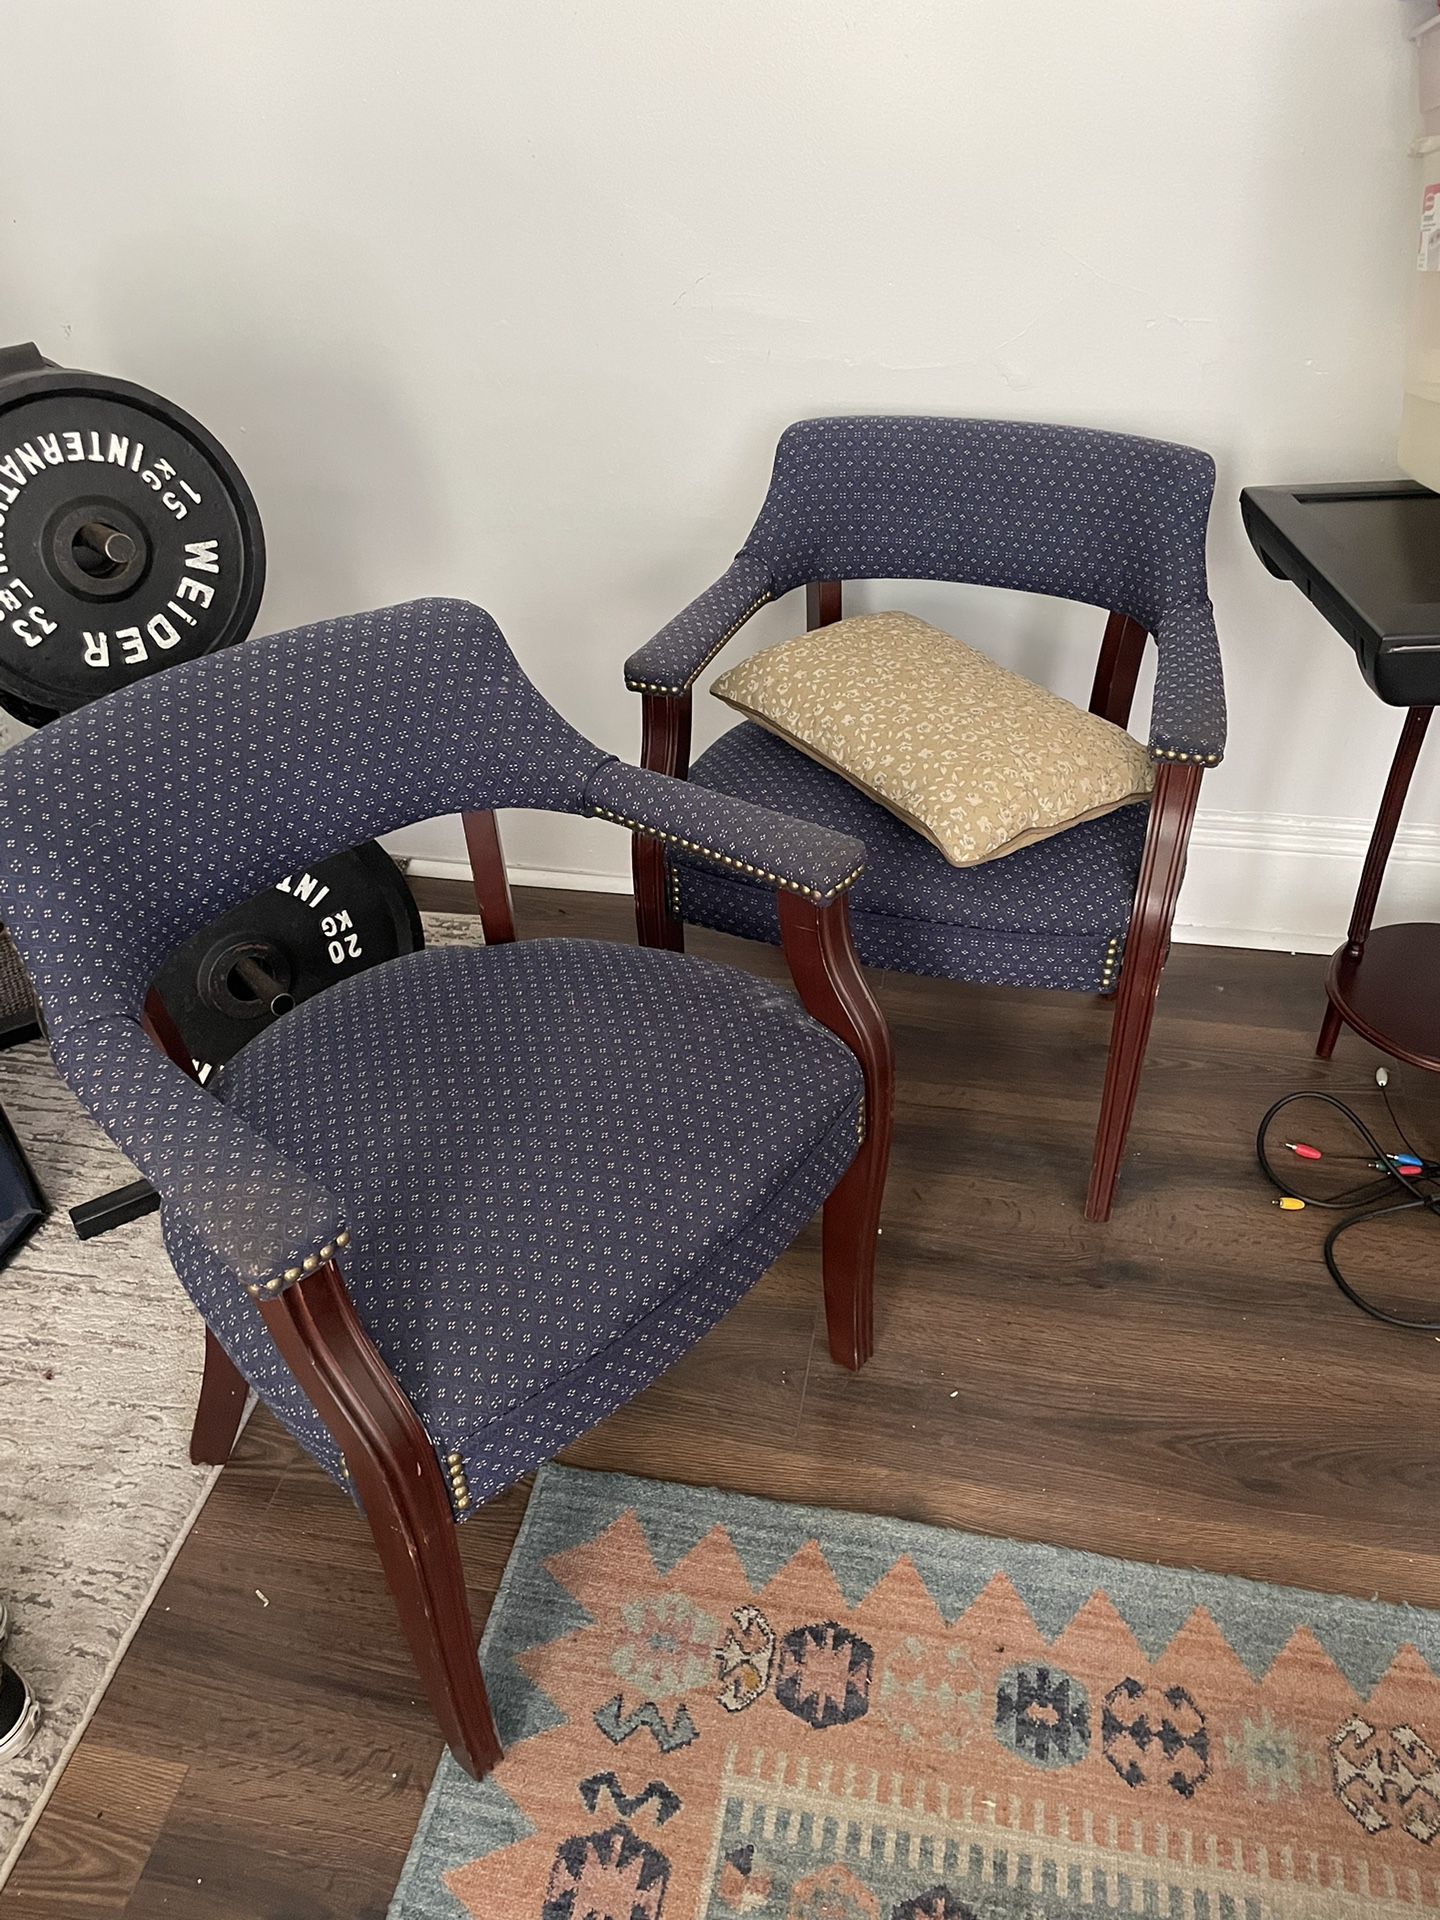 2 Happy fabric chairs